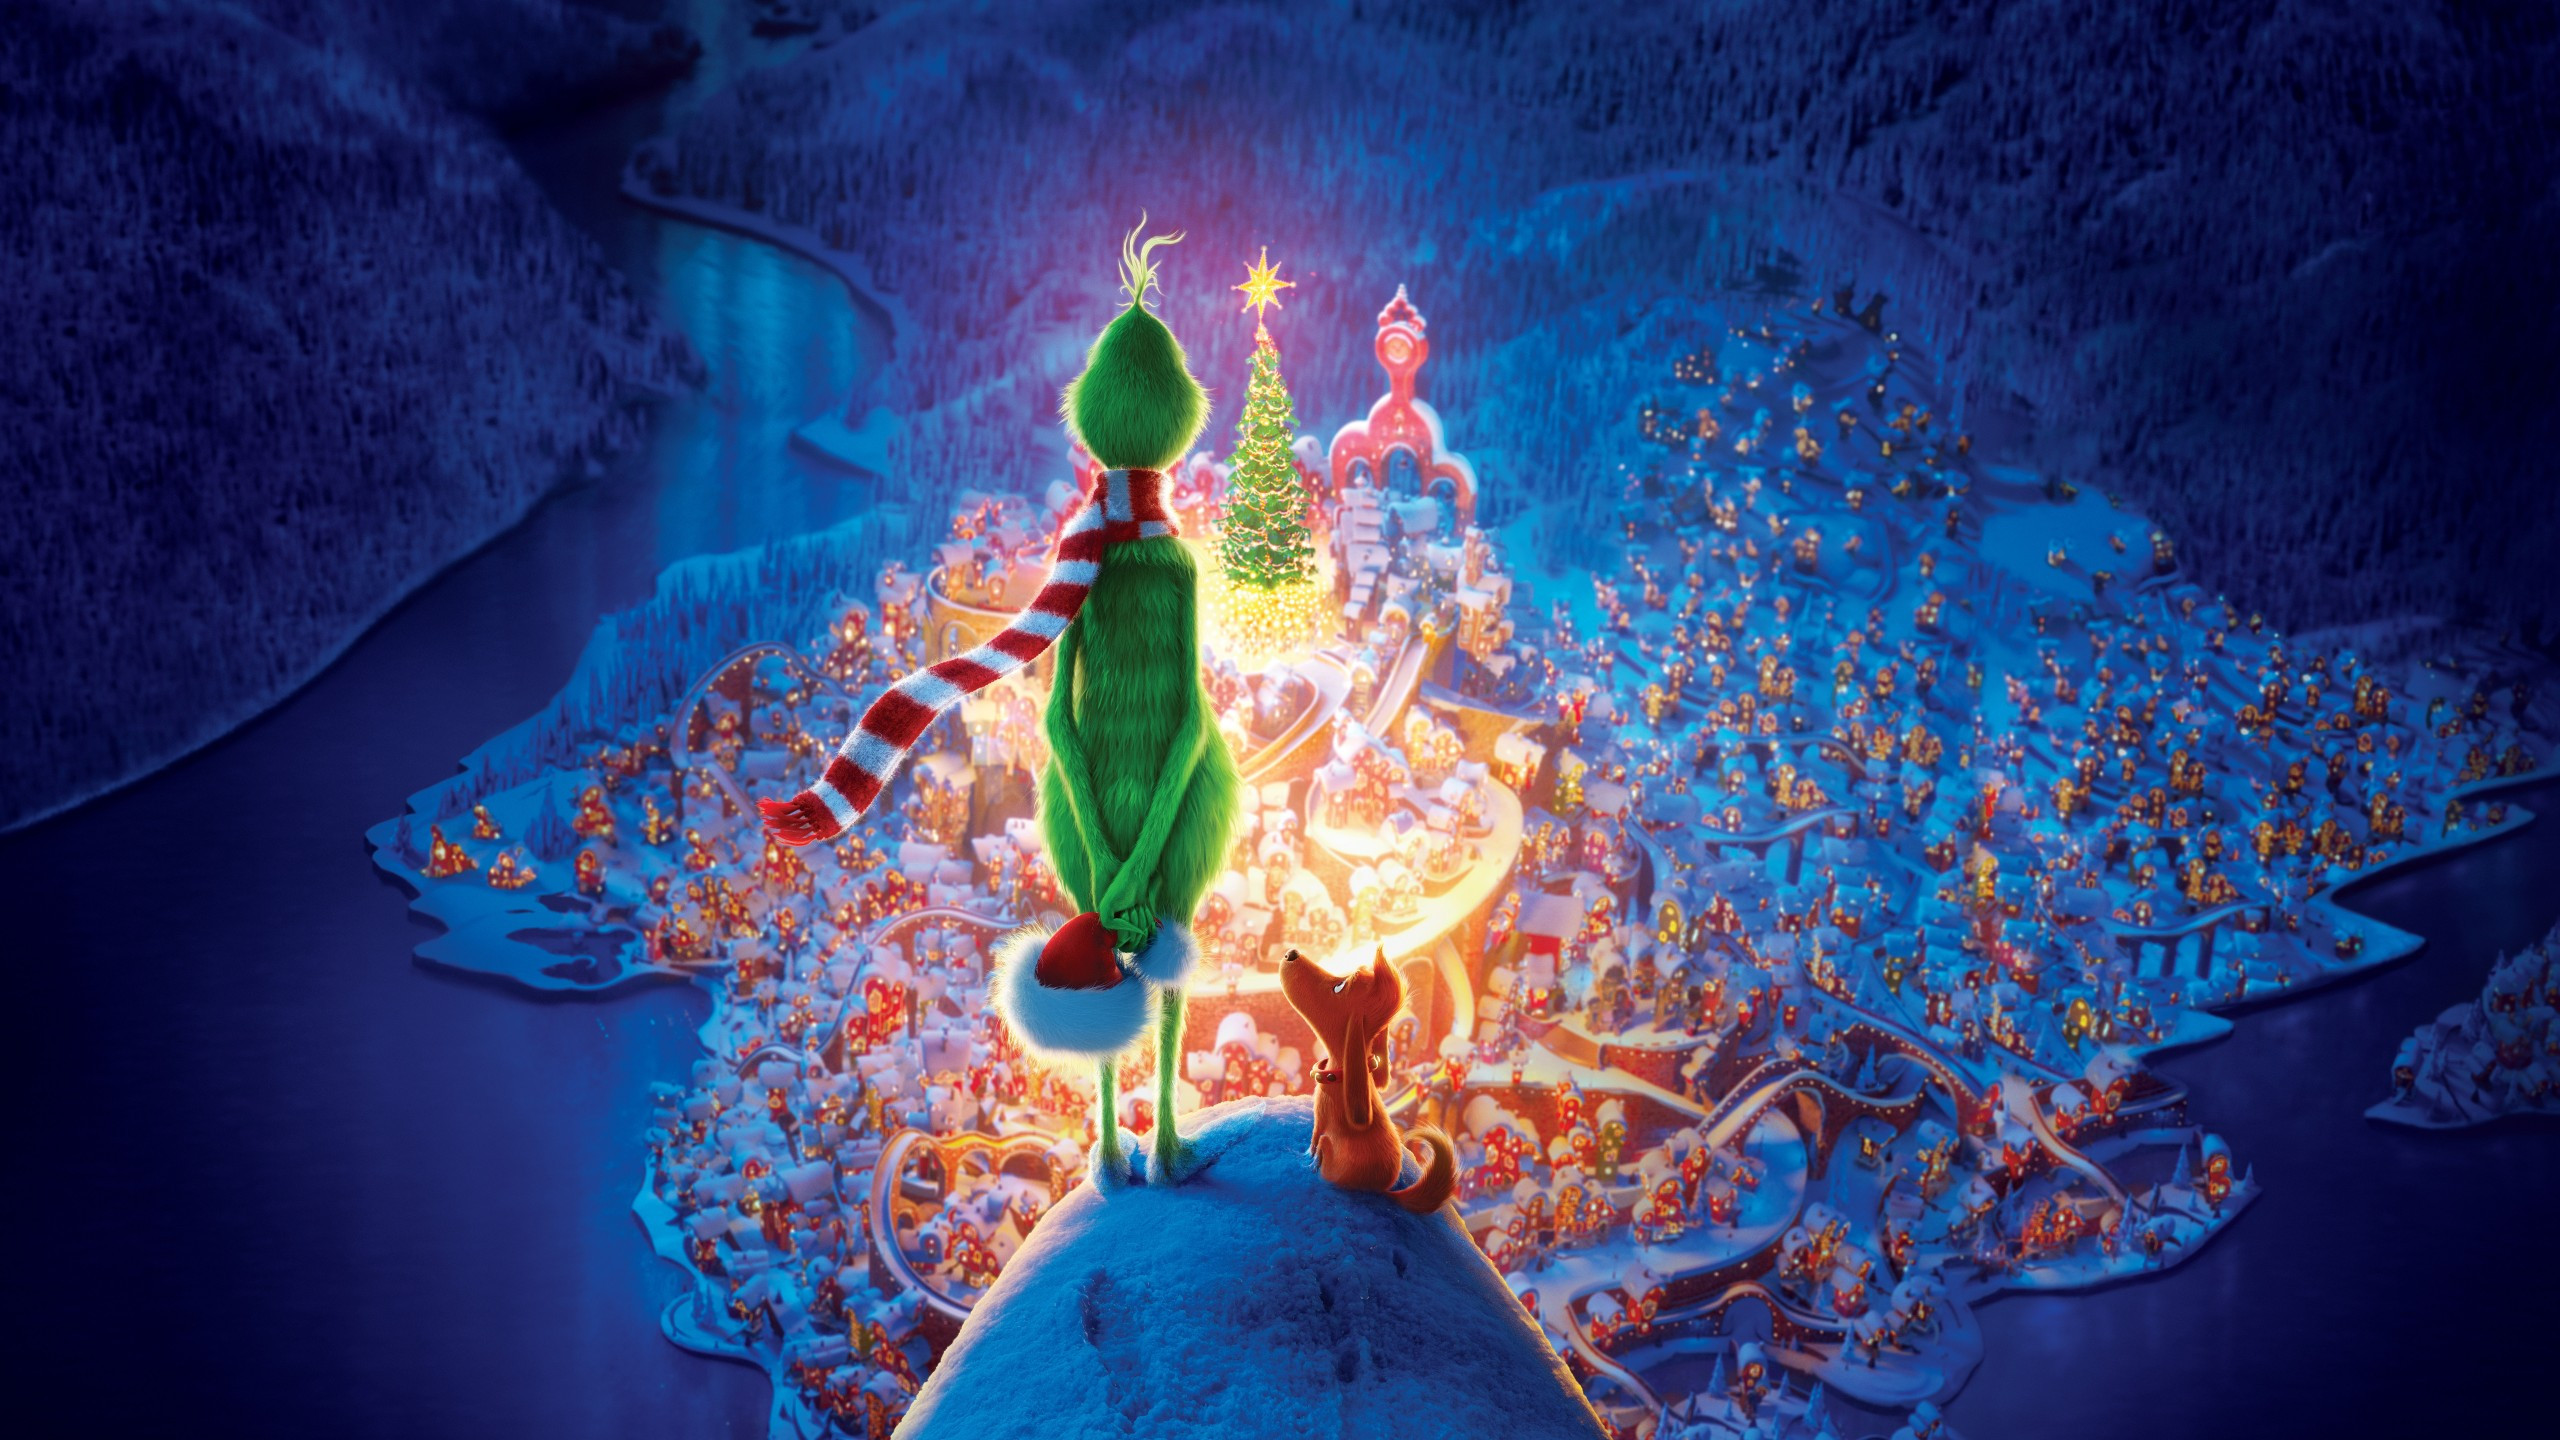 Download 2560x1440 The Grinch, Animation, Christmas Wallpaper for iMac 27 inch